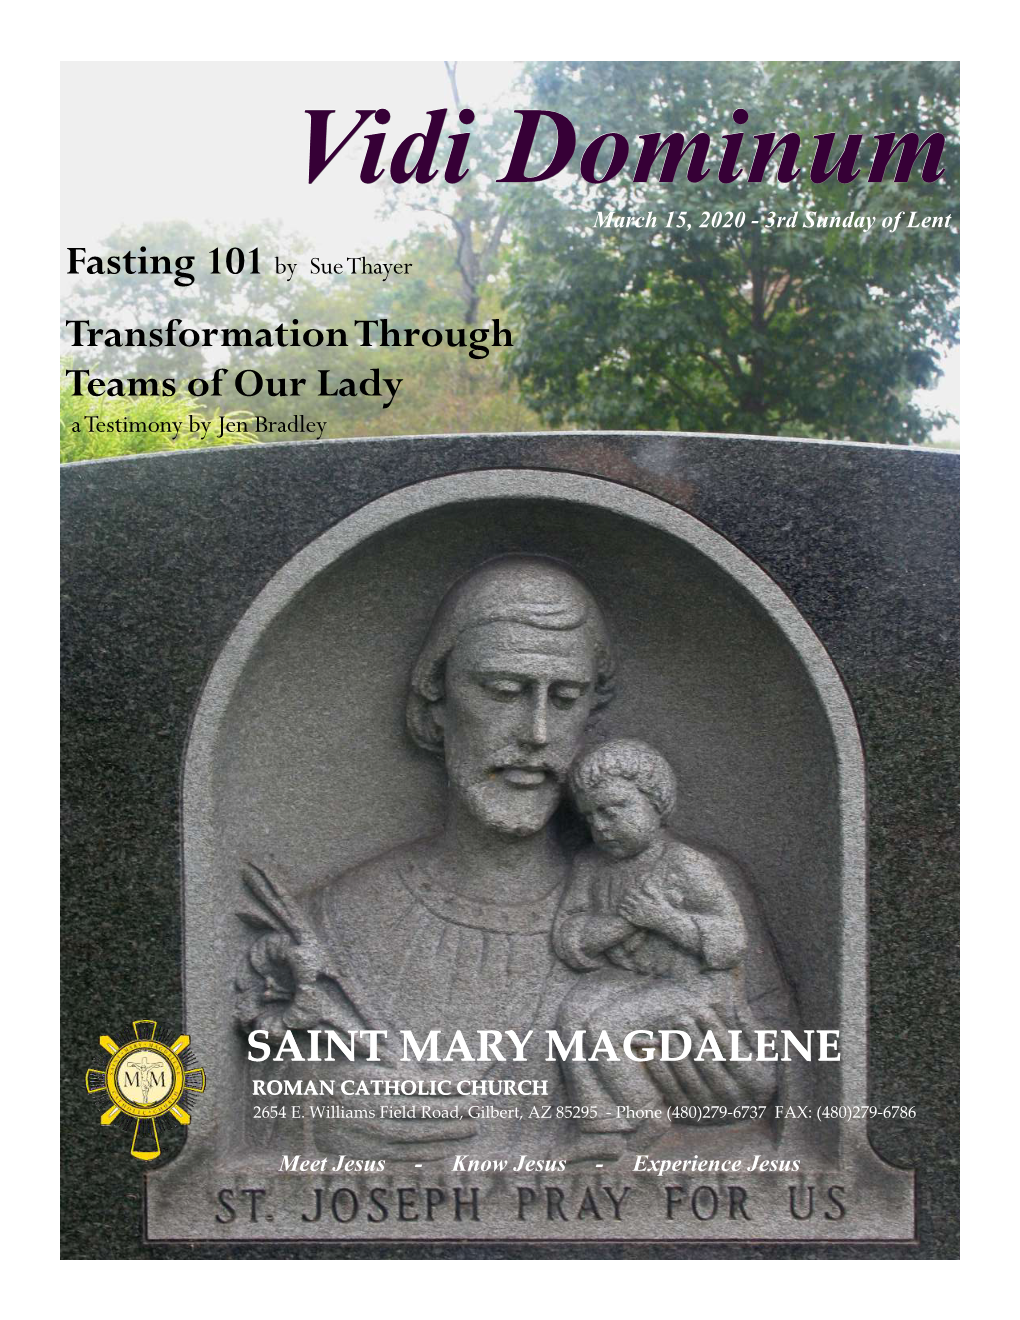 Vidi Dominum March 15, 2020 - 3Rd Sunday of Lent Fasting 101 by Sue Thayer